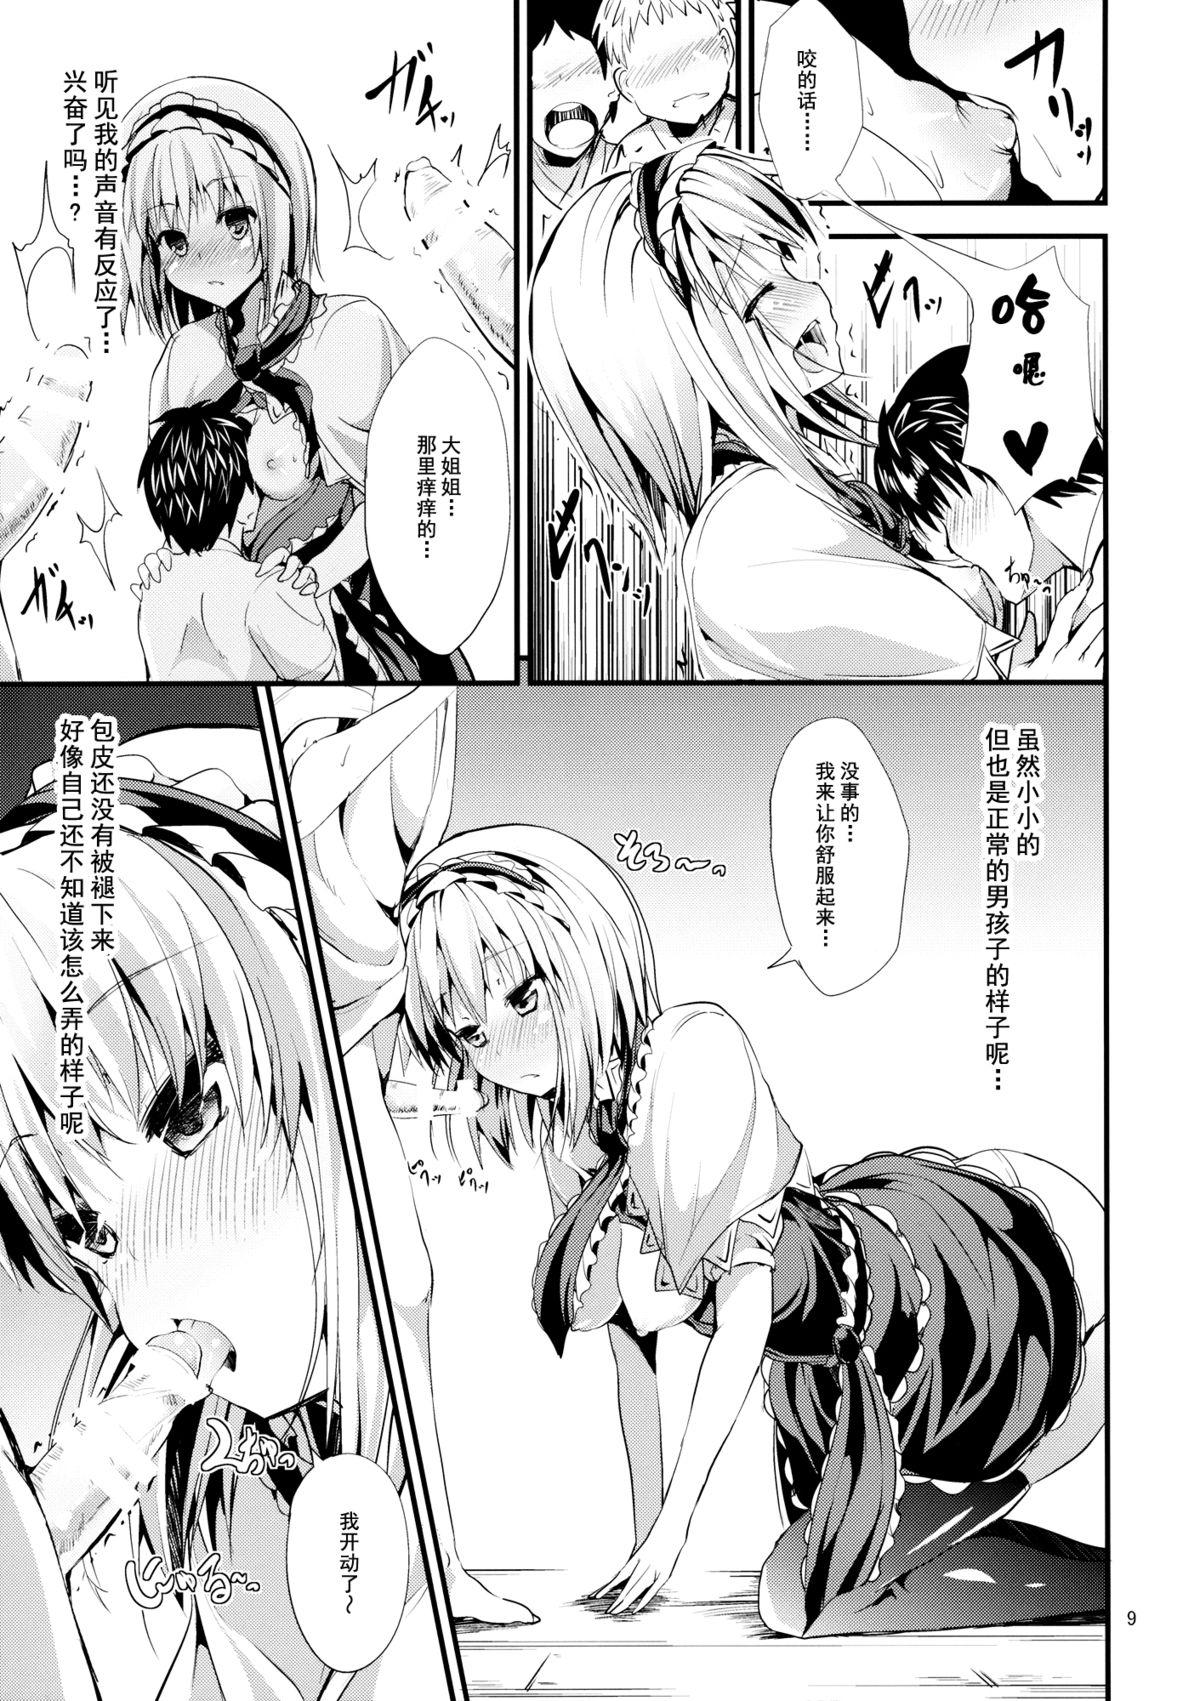 Cocks (Reitaisai 11) [Water Drop (MA-SA)] The Holiday (Touhou Project)[chinese]【伞尖汉化】 - Touhou project All - Page 9